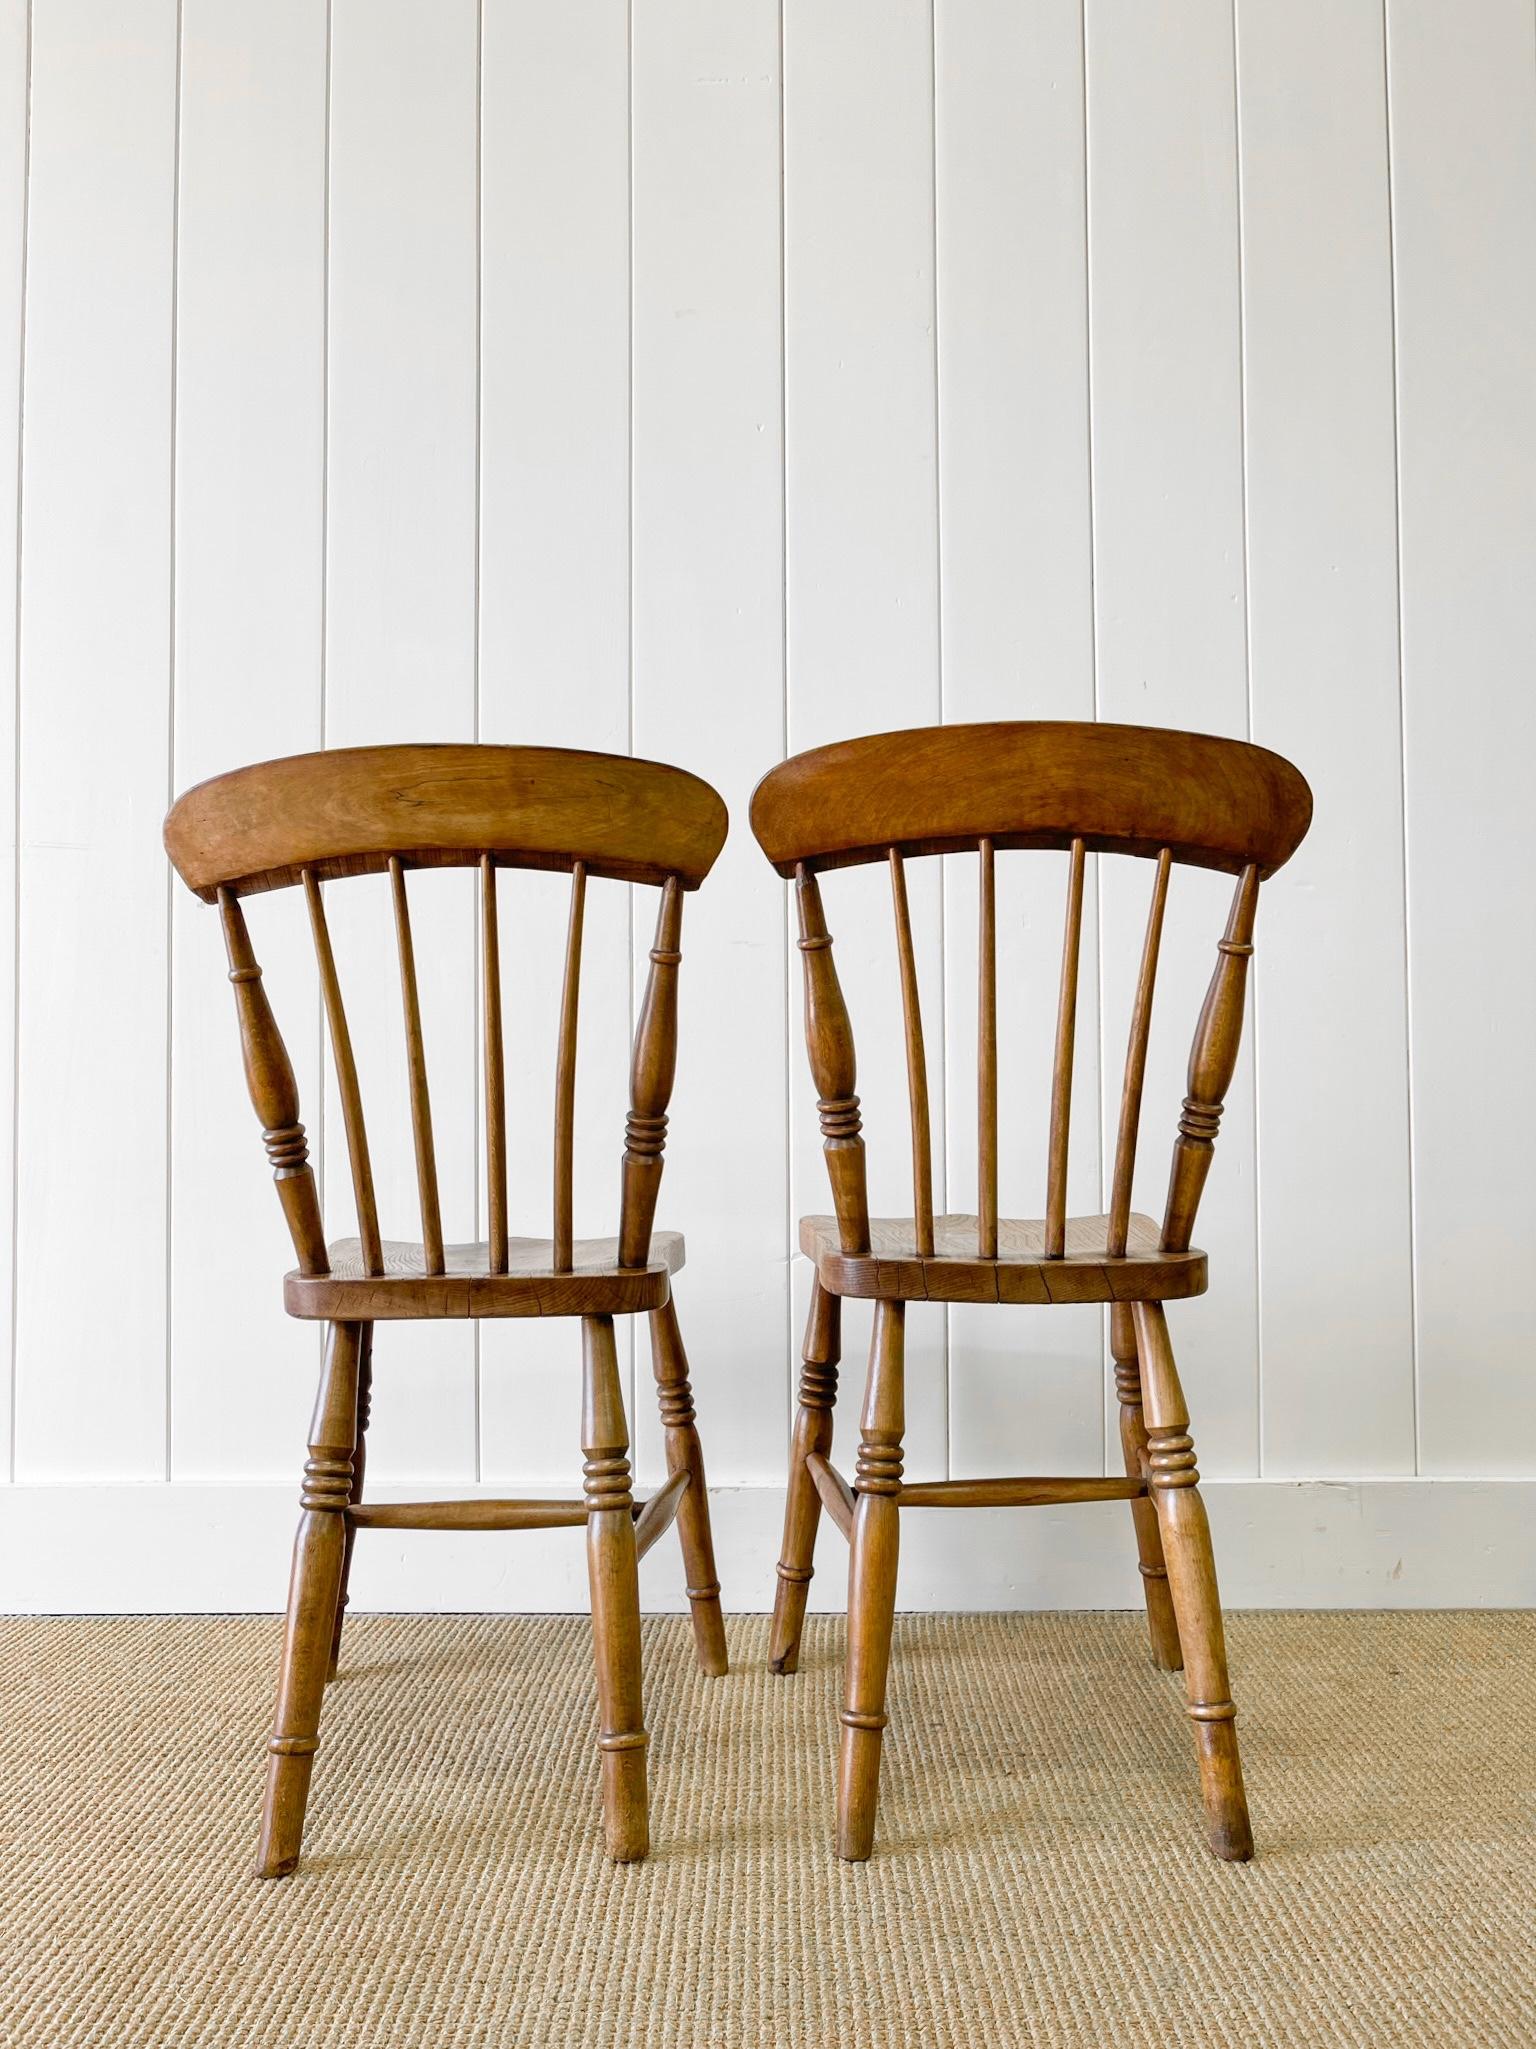 An Antique Set of 4 Early 19th Century Stick Back Chairs For Sale 12